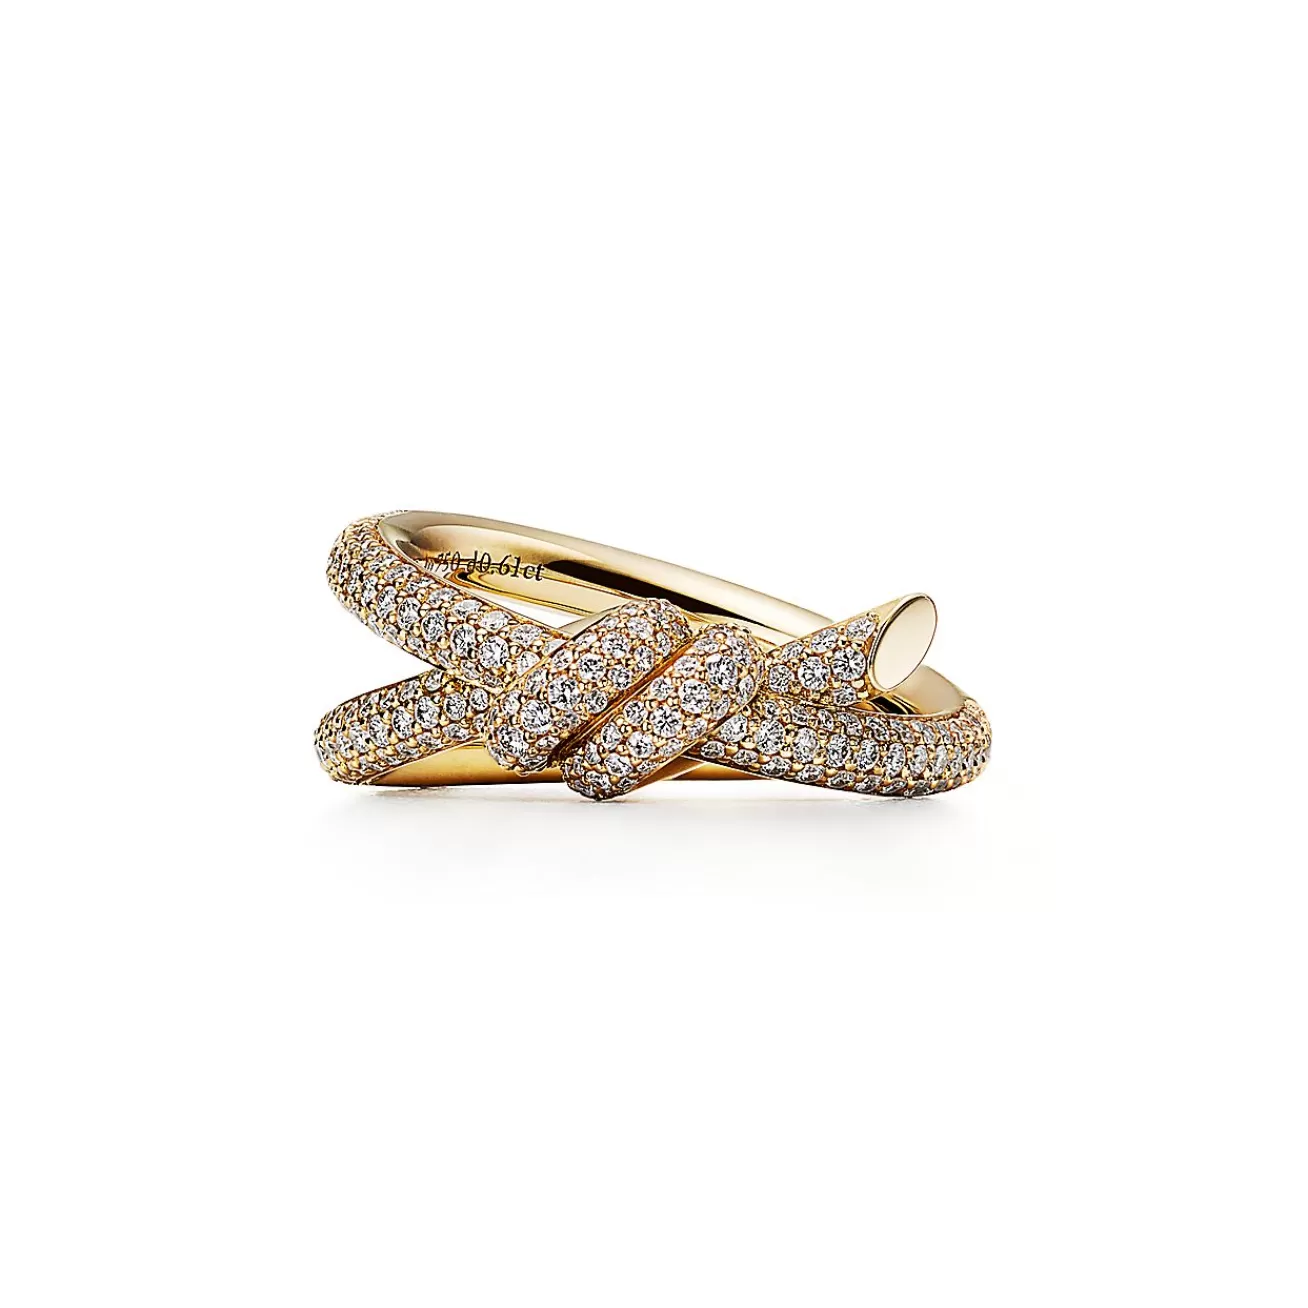 Tiffany & Co. Tiffany Knot Double Row Ring in Yellow Gold with Diamonds | ^ Rings | Gold Jewelry